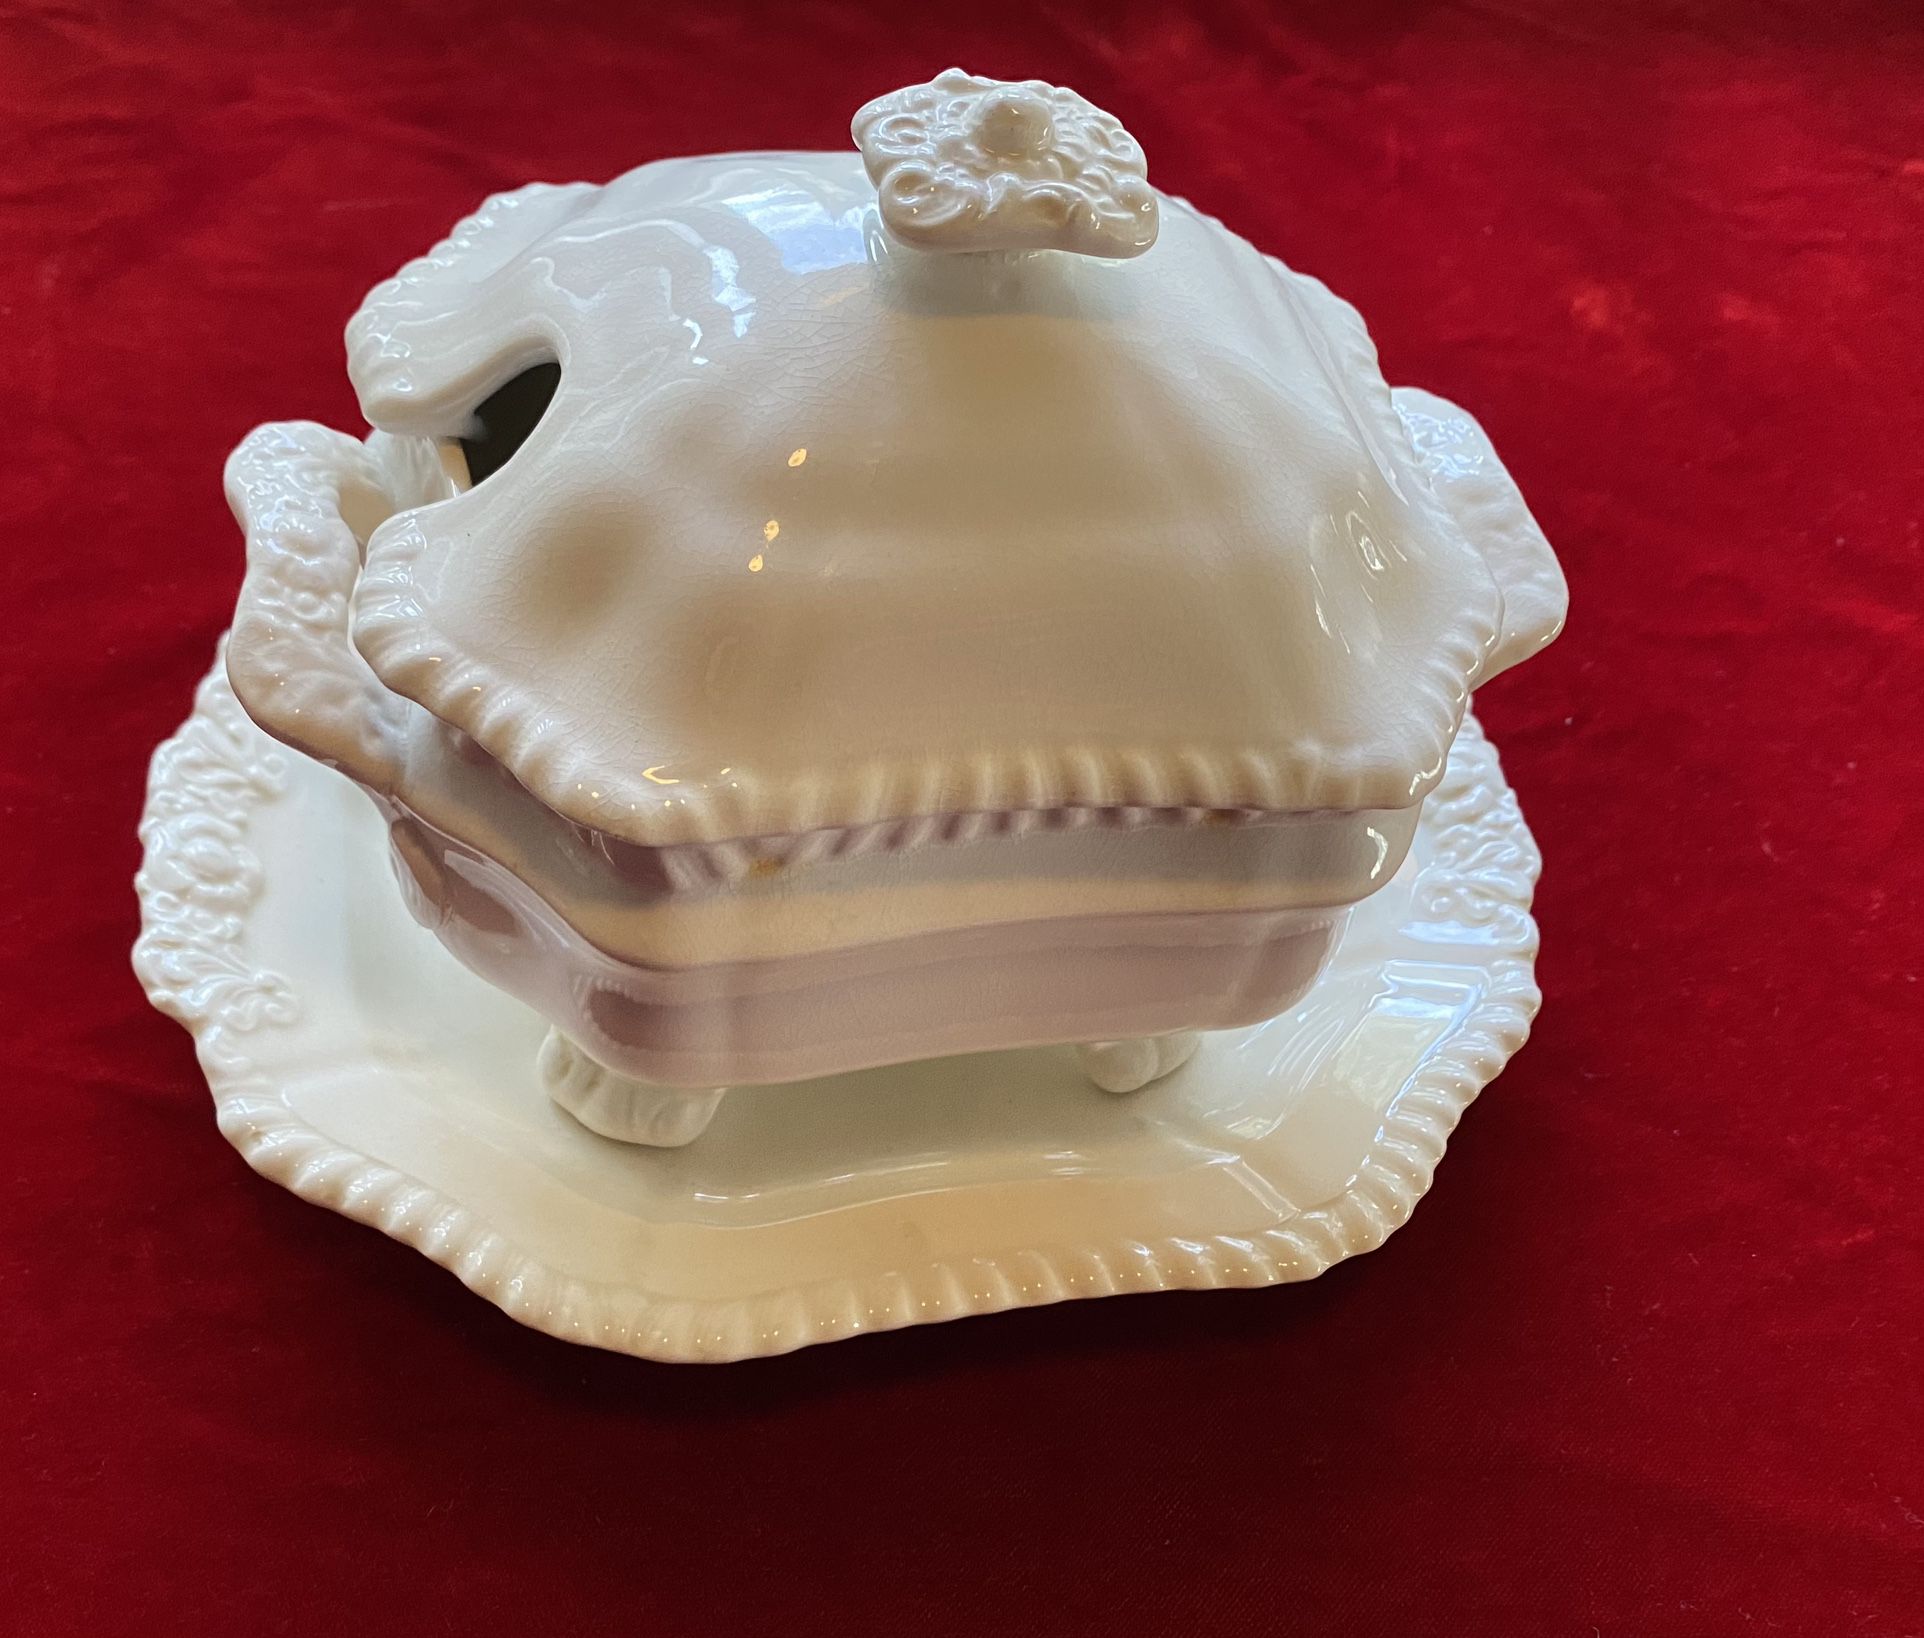 Vintage Rare COPELAND SPODE Rope-Edged Footed Sauce Tureen, Lid, Underplate